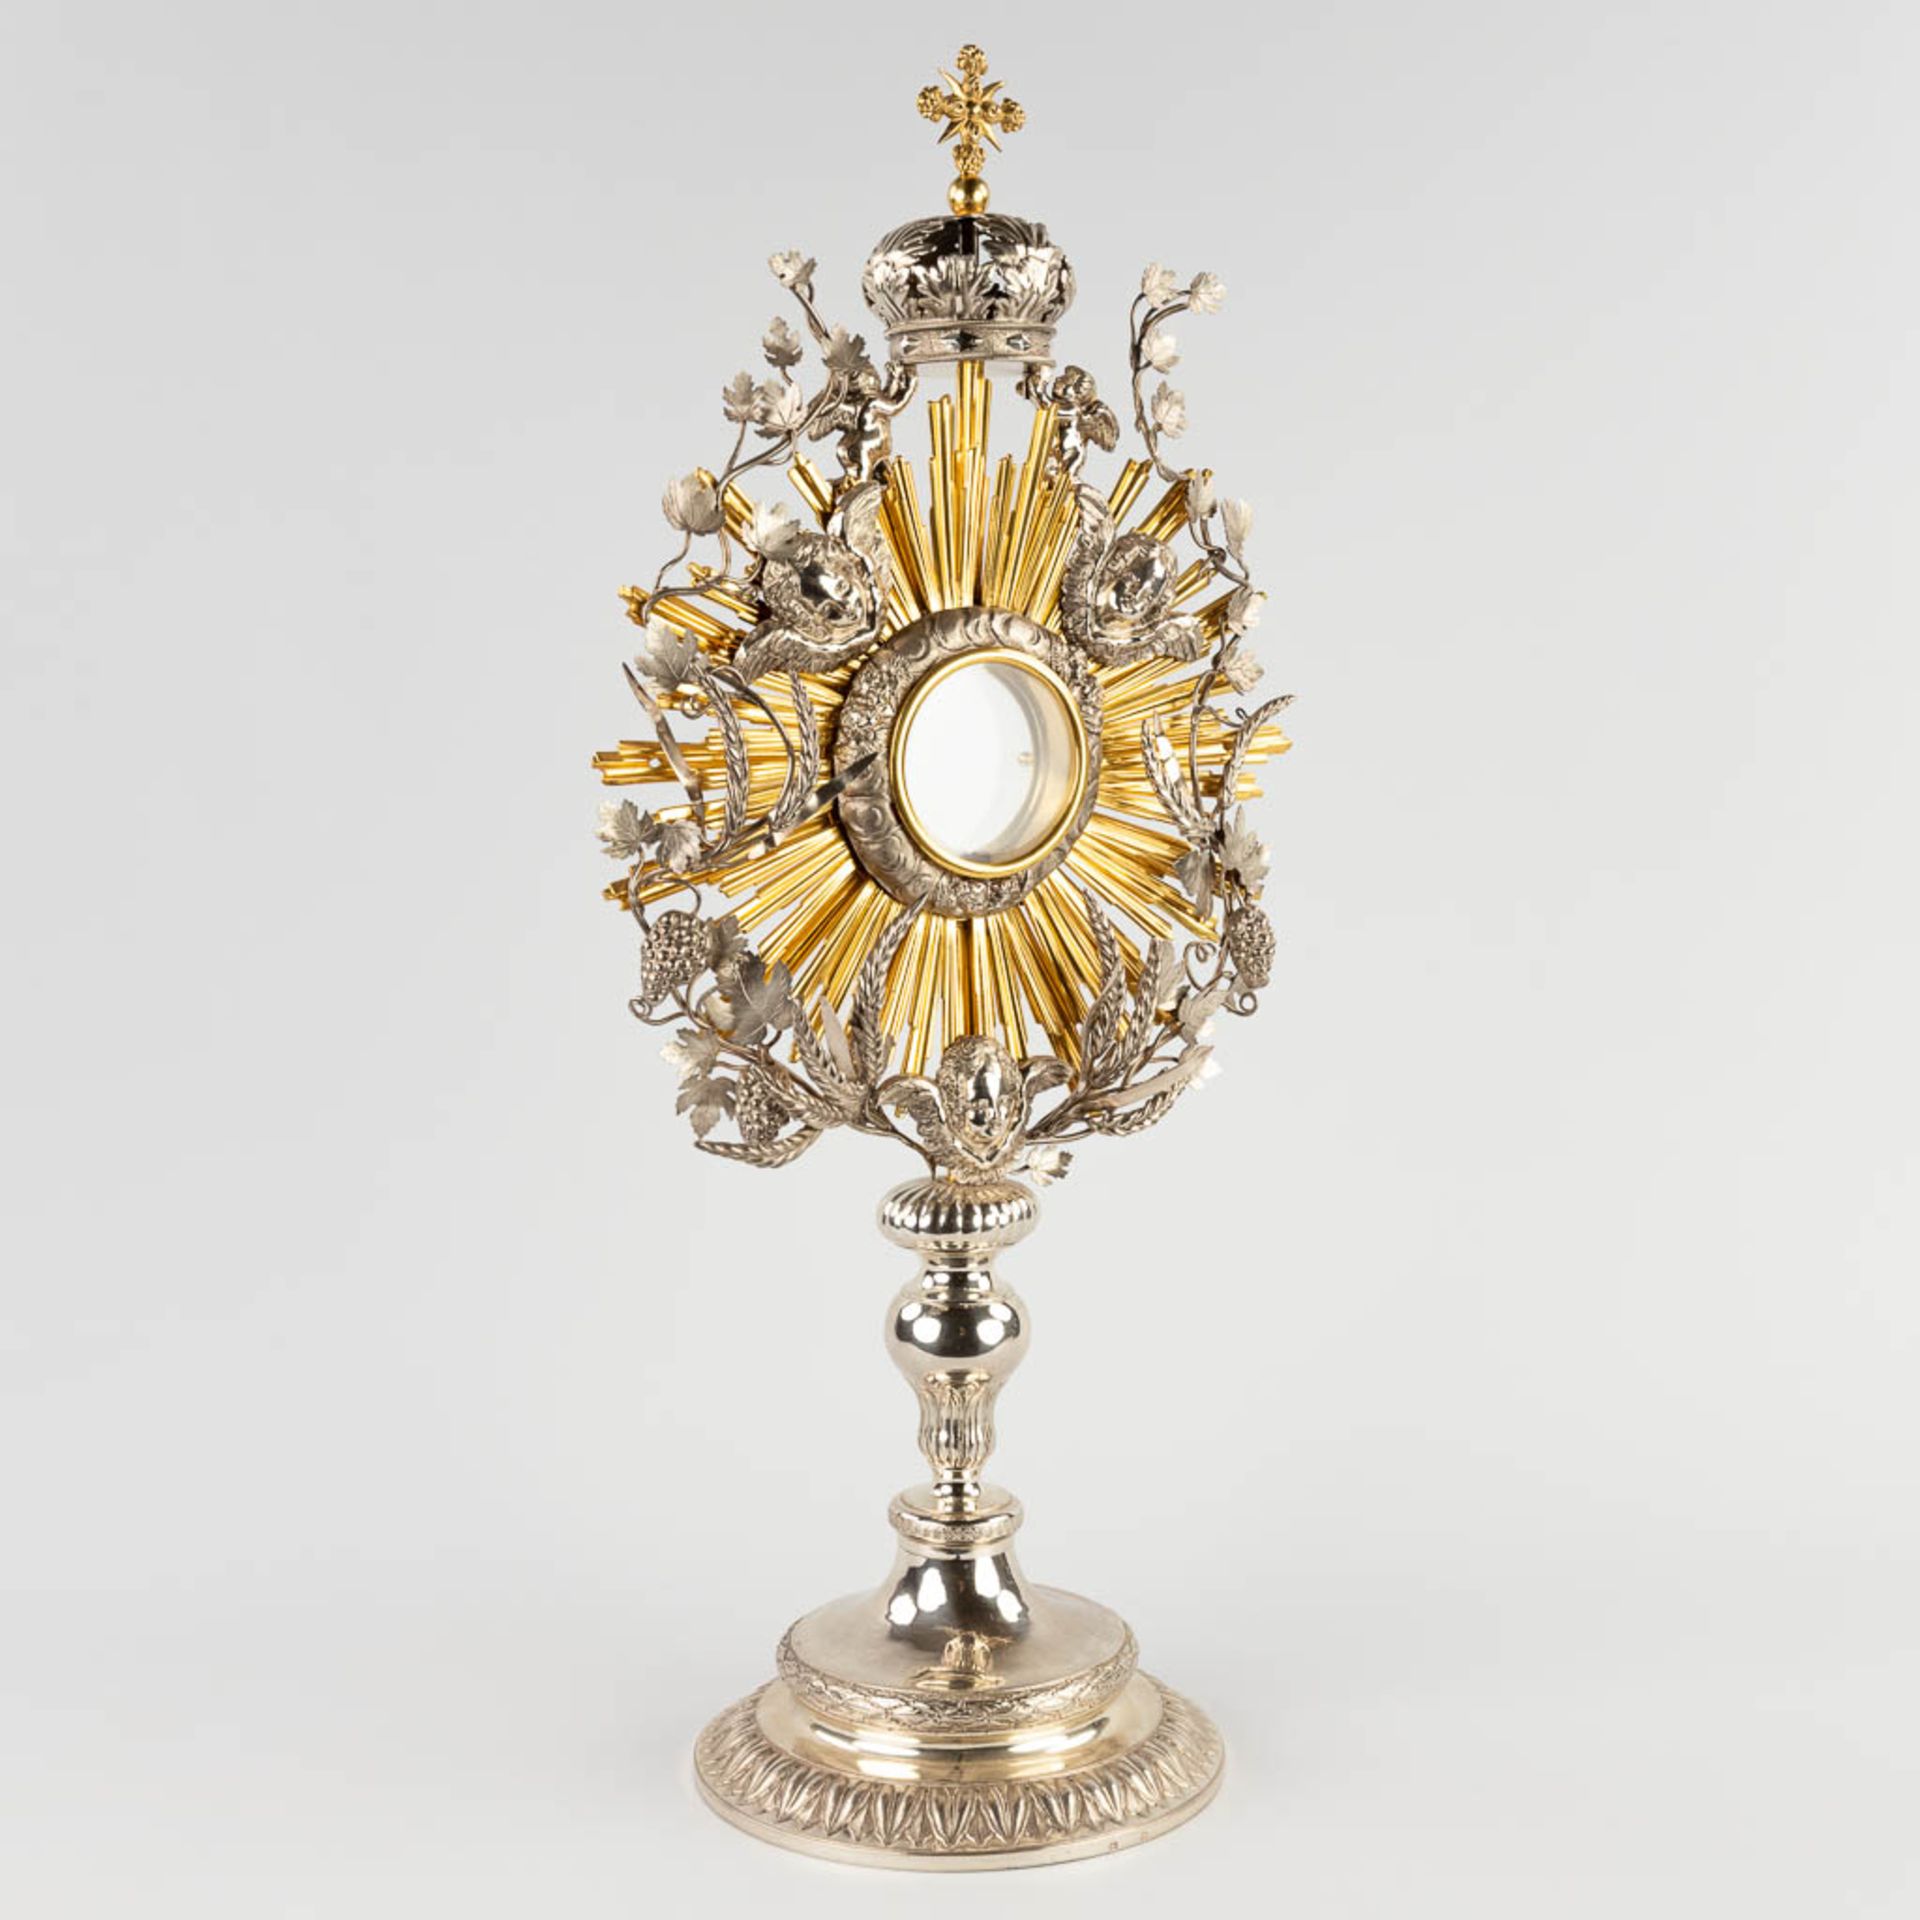 A sunburst monstrance, silver, decorated with angels, wheat and grape vines. Belgium, 19th C. (D:20 - Image 3 of 22